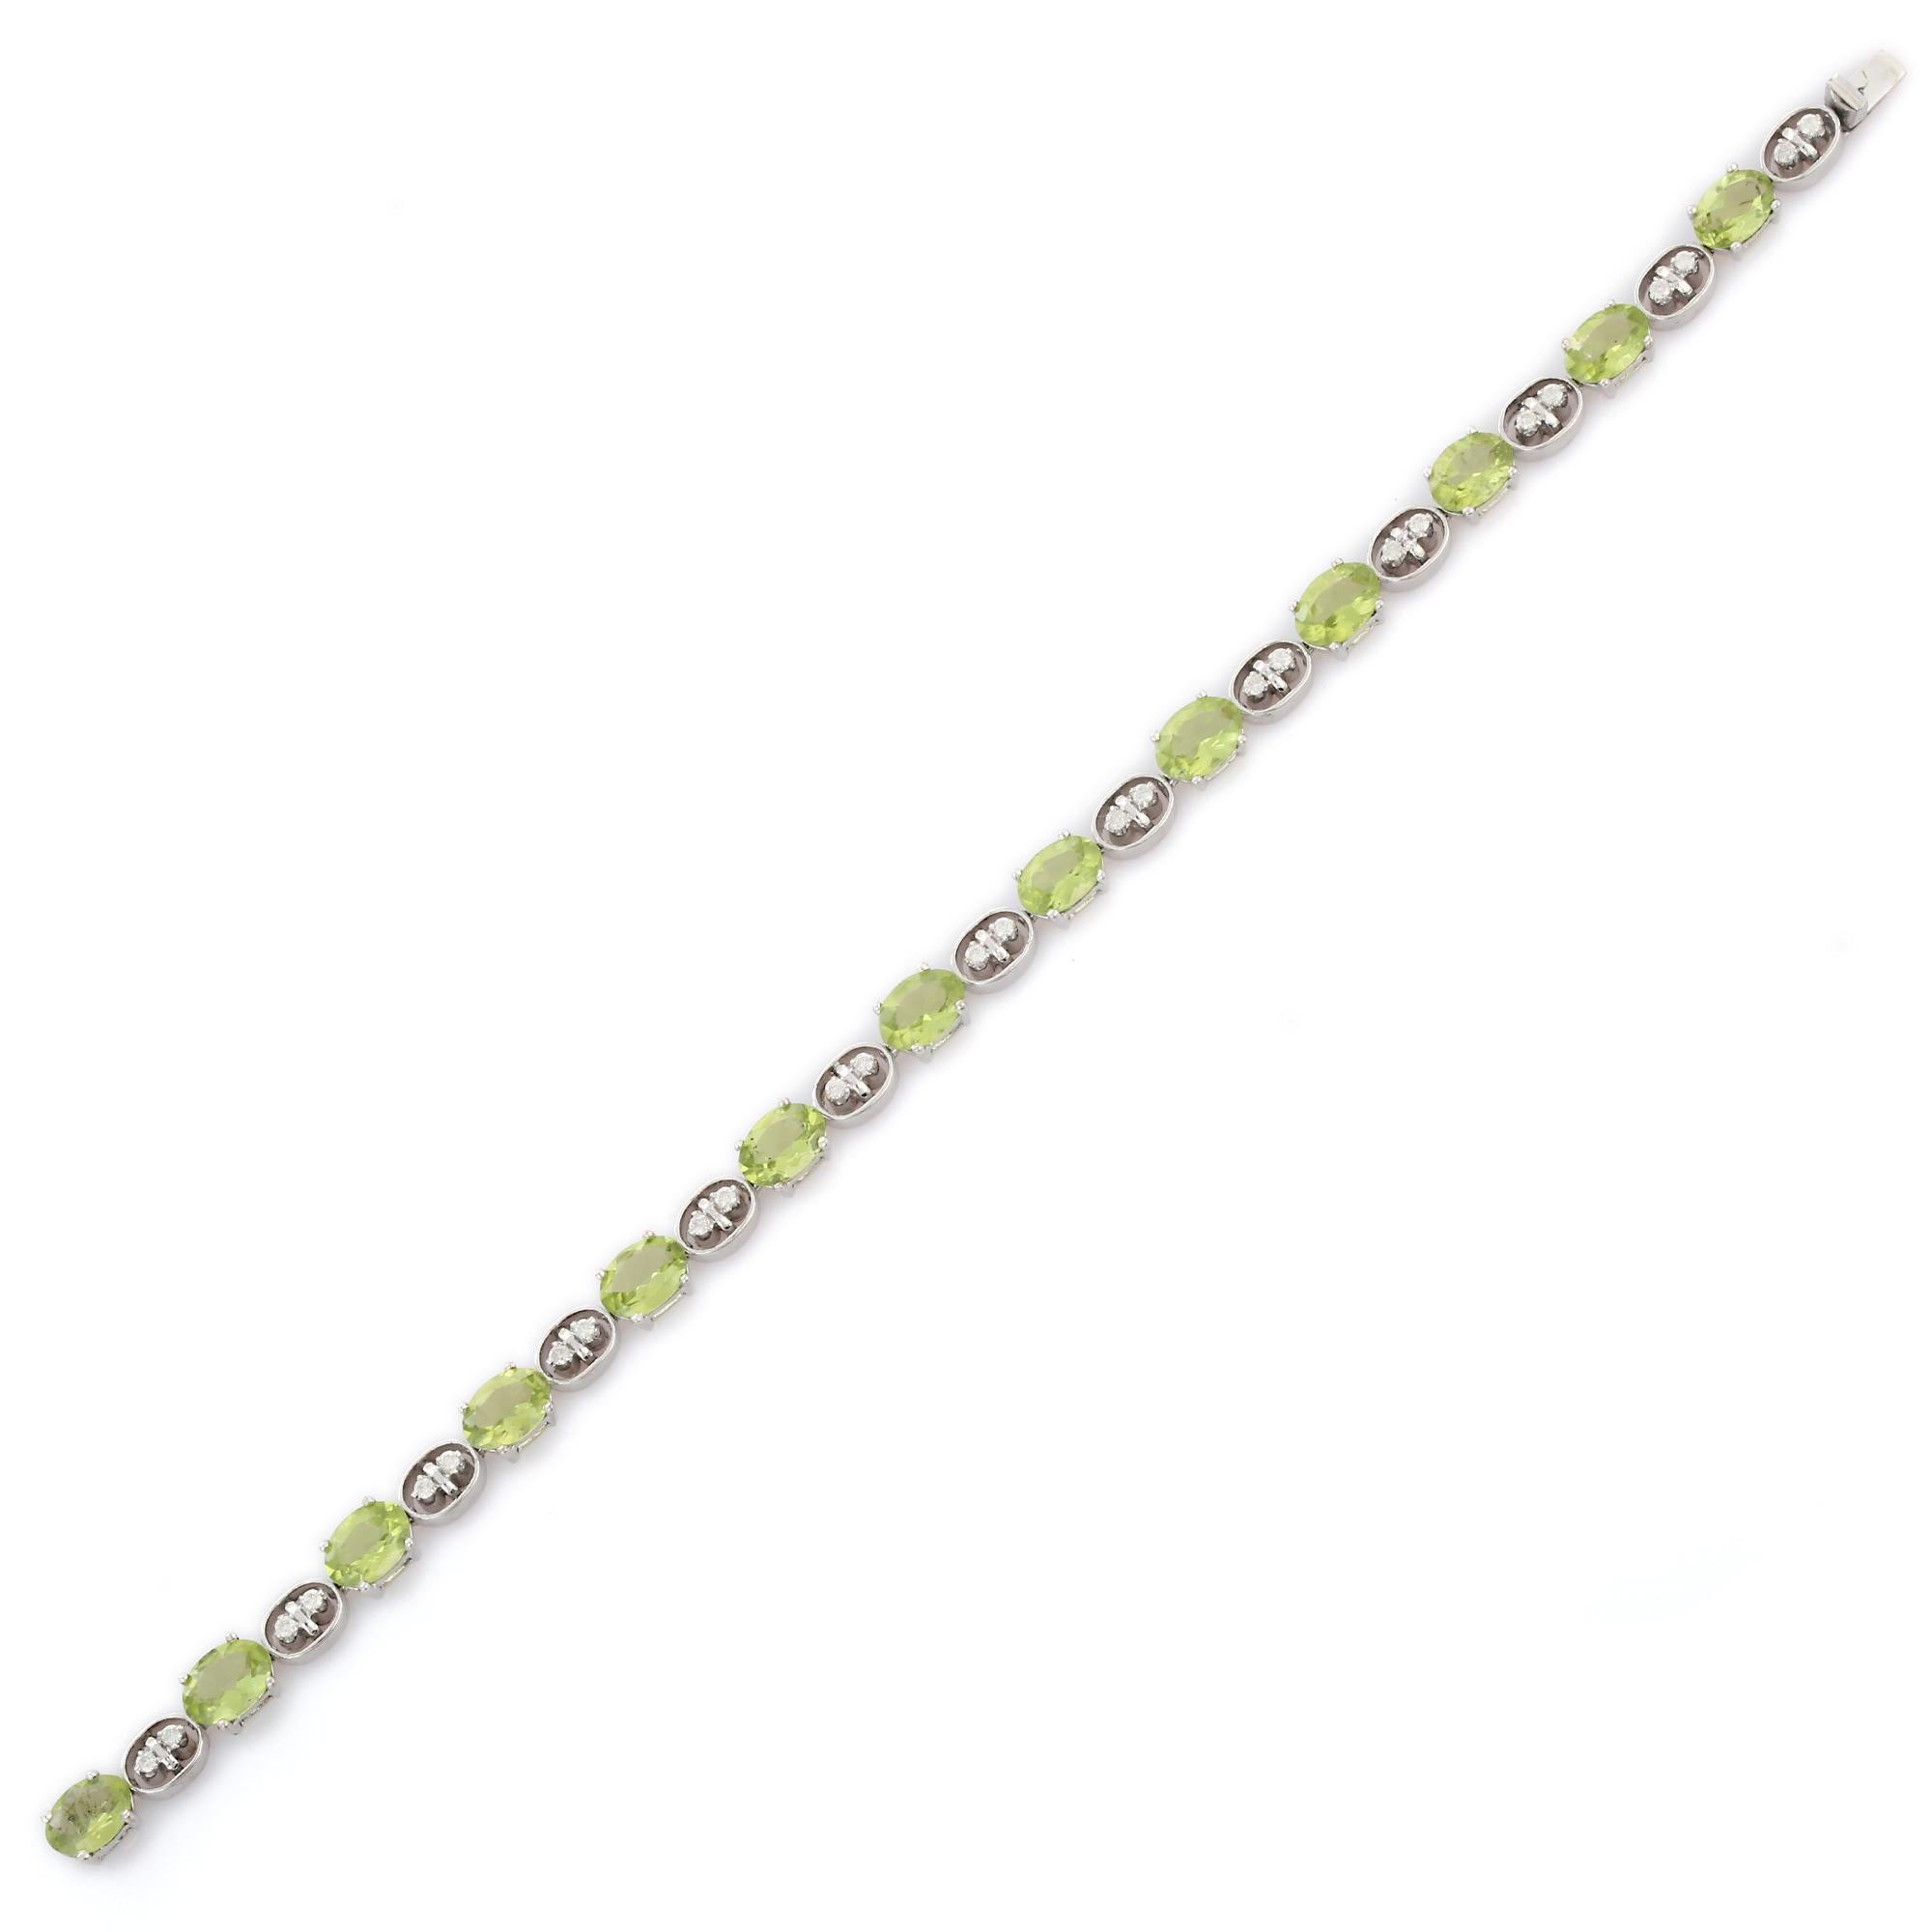 This Peridot Diamond Tennis Bracelet in 10K gold showcases 13 endlessly sparkling natural peridot, weighing 9.15 carats and 26 diamonds weighing 0.38 carats. It measures 7.25 inches long in length. 
Peridot attracts love and calms anger by giving